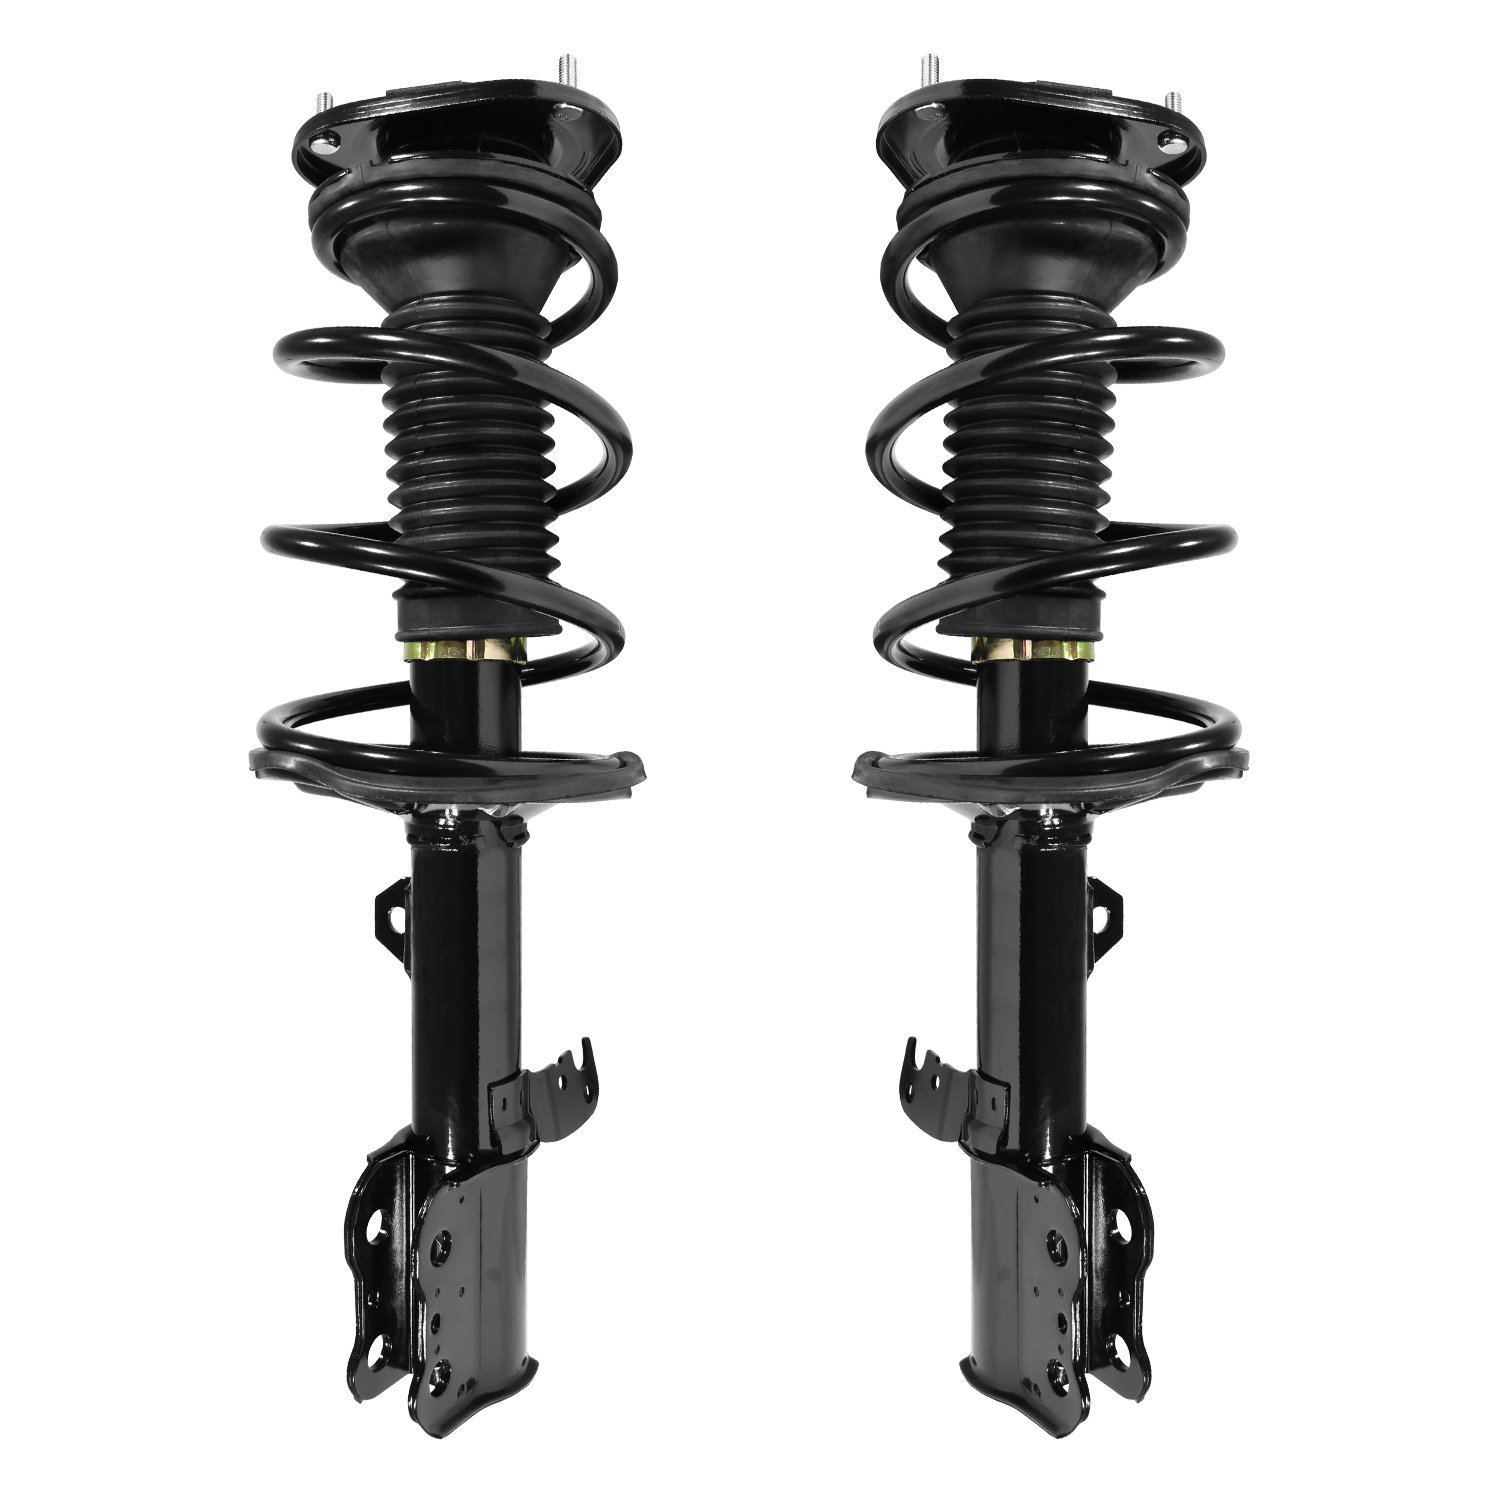 2-11751-11752-001 Suspension Strut & Coil Spring Assembly Set Fits Select Toyota Corolla